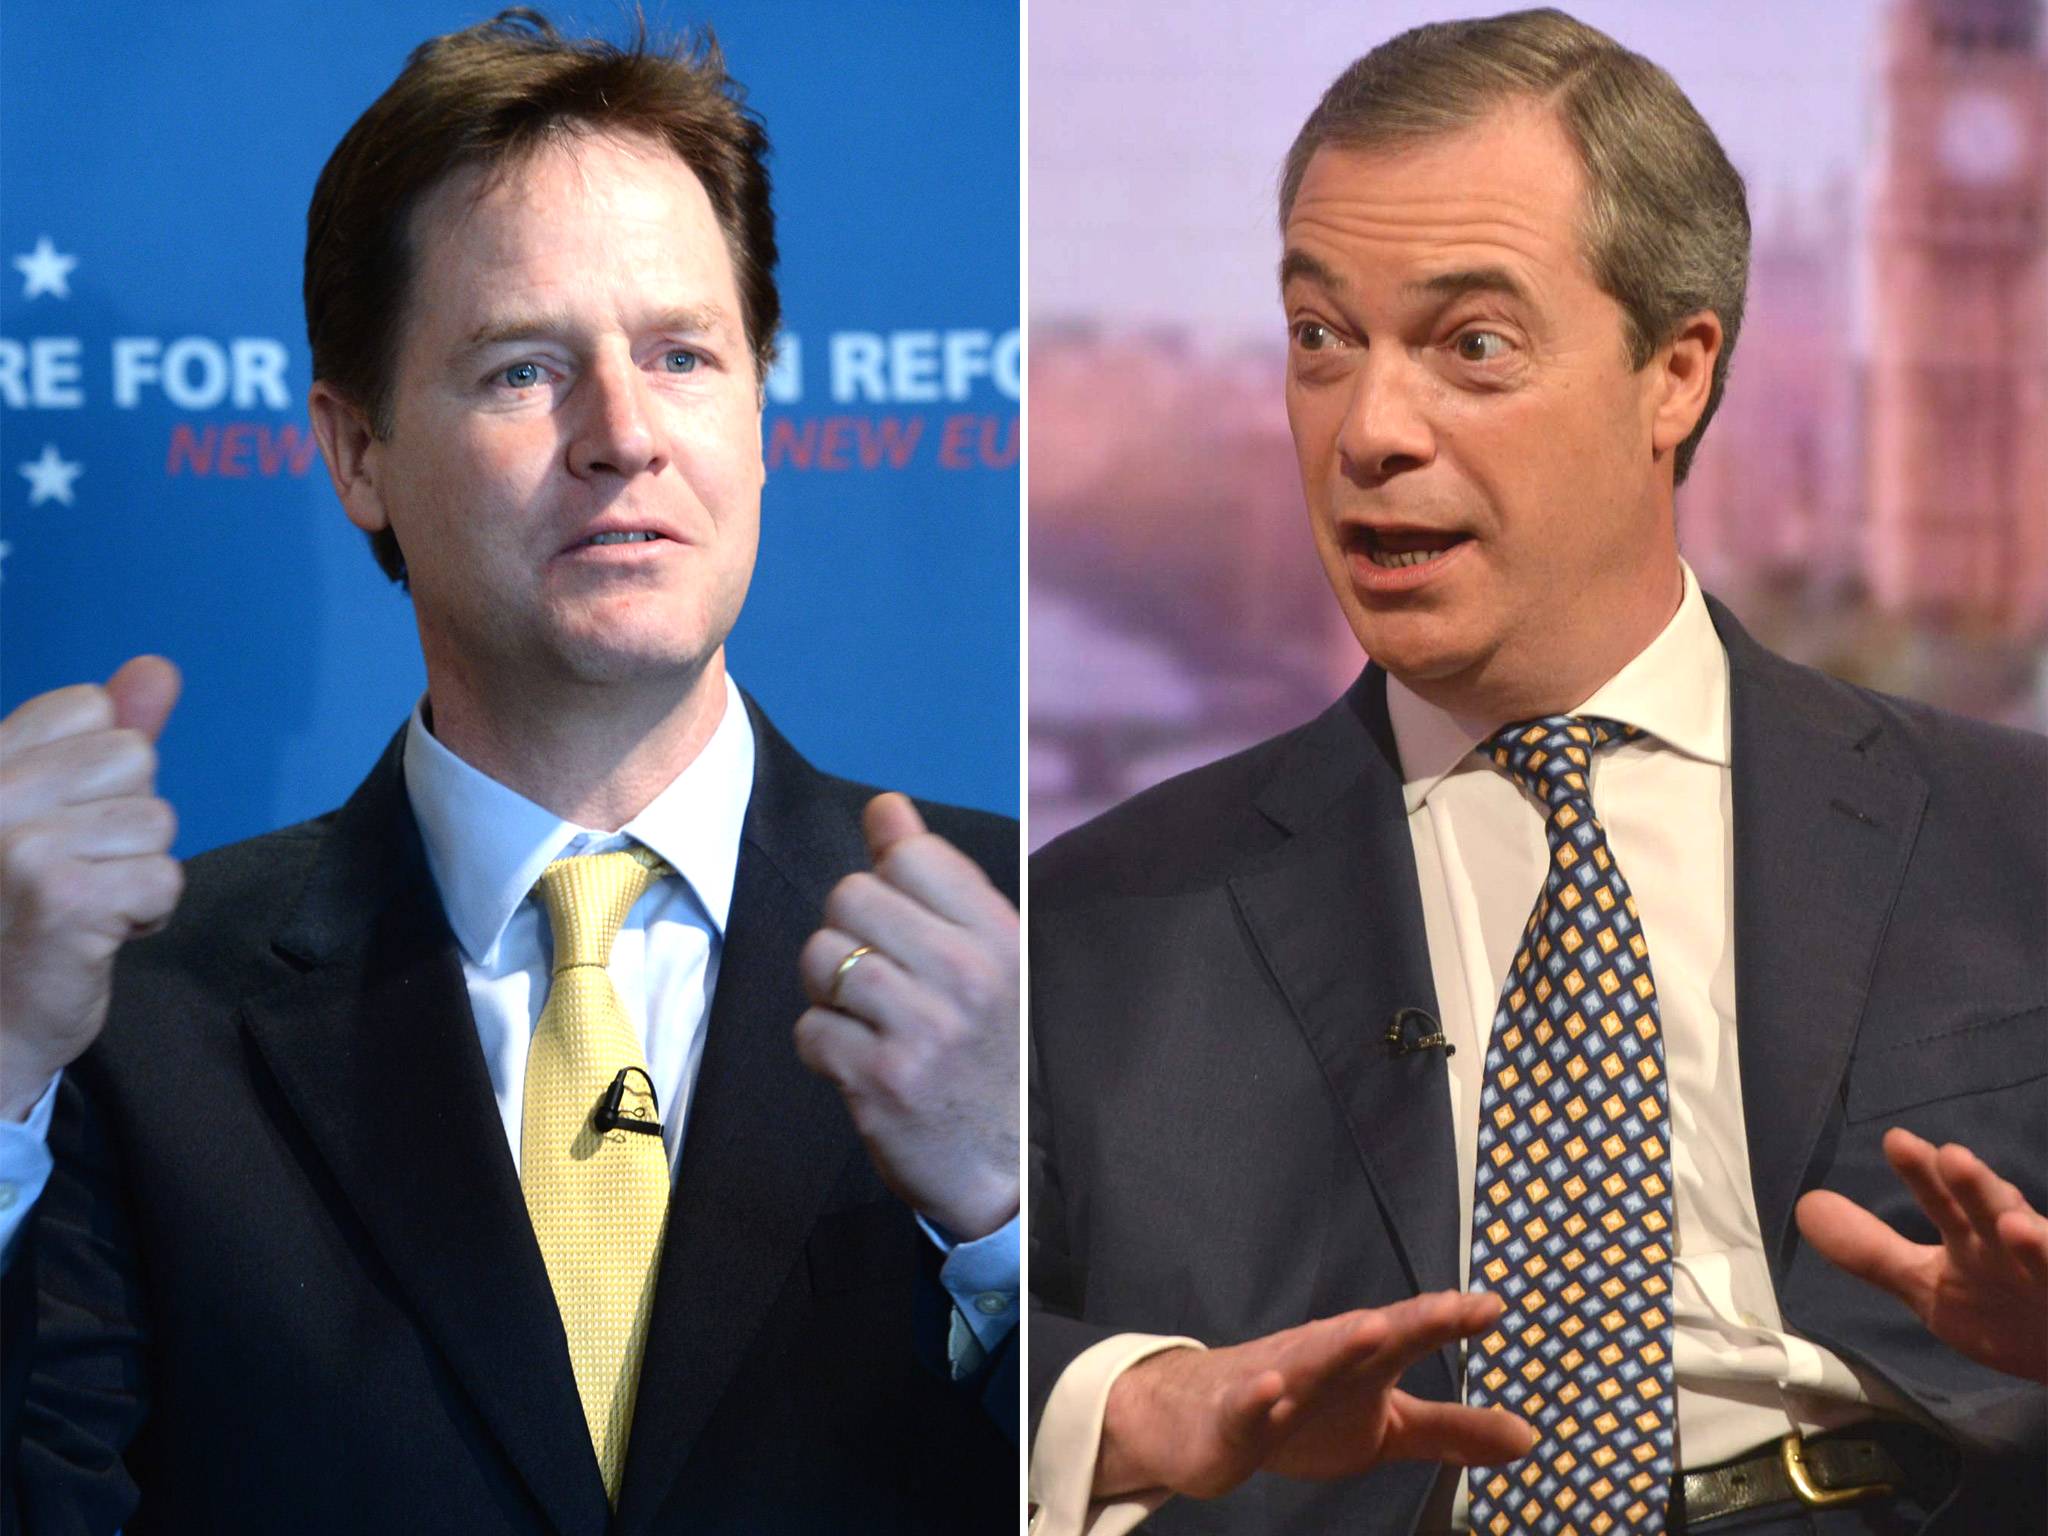 Nick Clegg will take part in the first of two debates with Nigel Farage on Wednesday night, with the second clash set for a week later